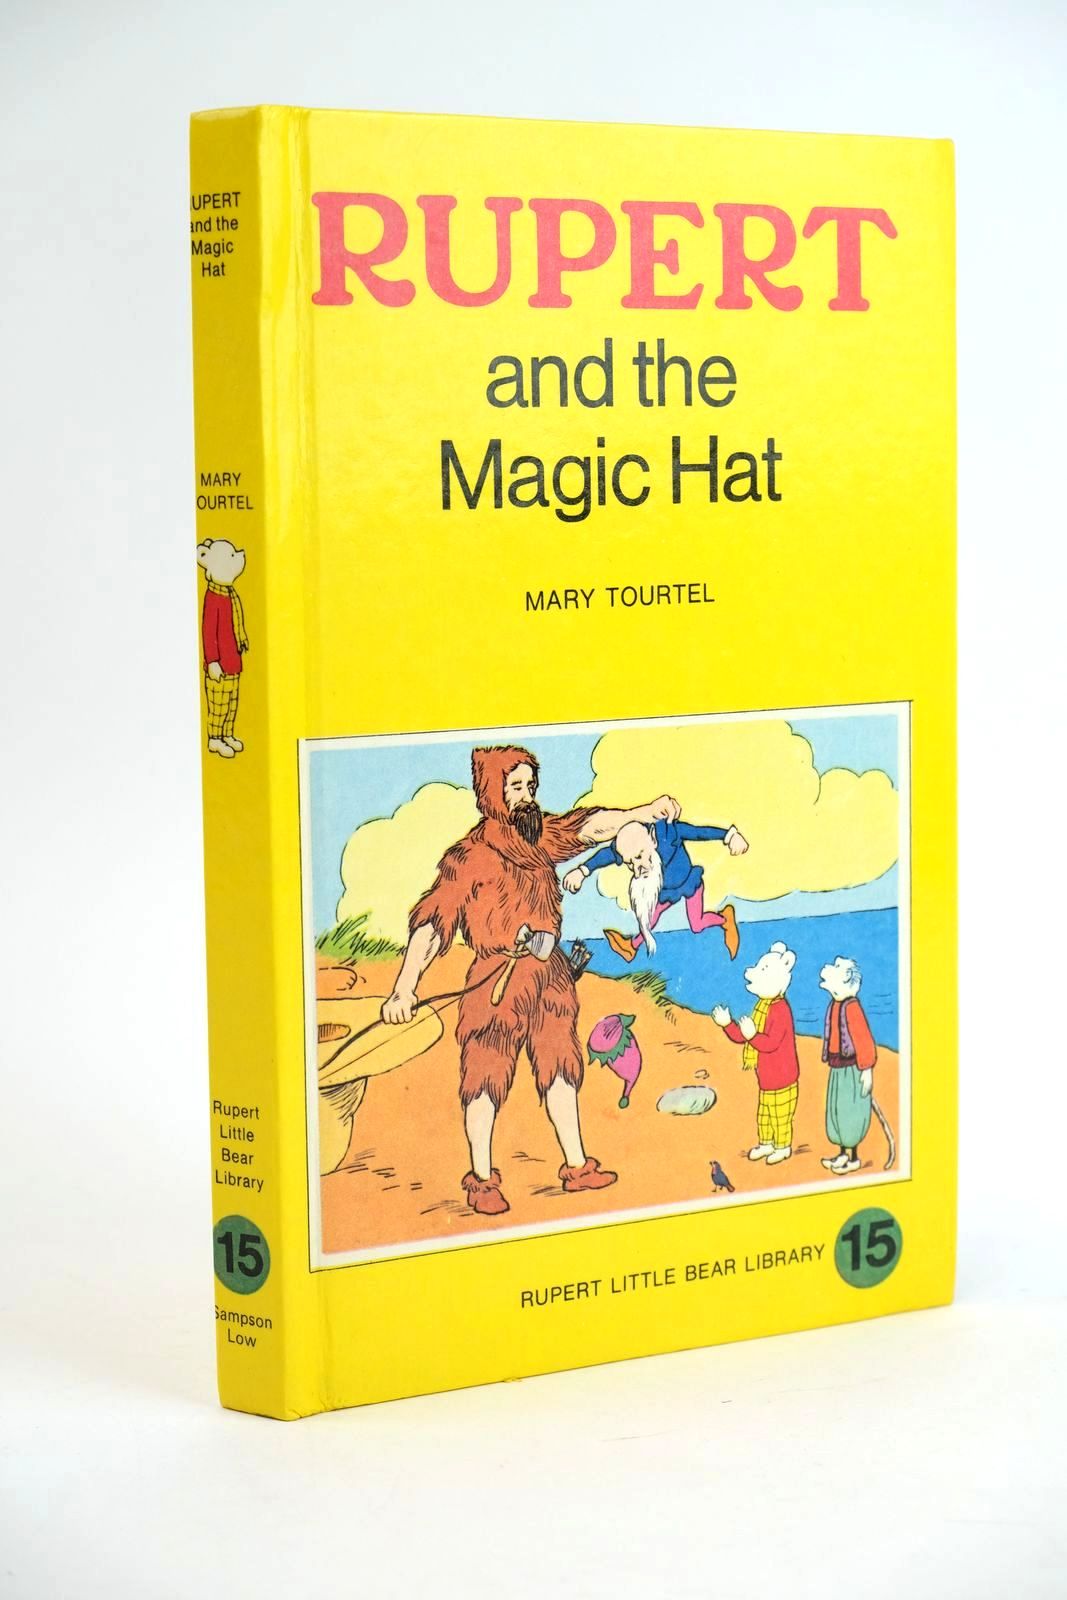 Photo of RUPERT AND THE MAGIC HAT - RUPERT LITTLE BEAR LIBRARY No. 15 (WOOLWORTH) written by Tourtel, Mary illustrated by Tourtel, Mary published by Sampson Low, Marston &amp; Co. Ltd. (STOCK CODE: 1323462)  for sale by Stella & Rose's Books